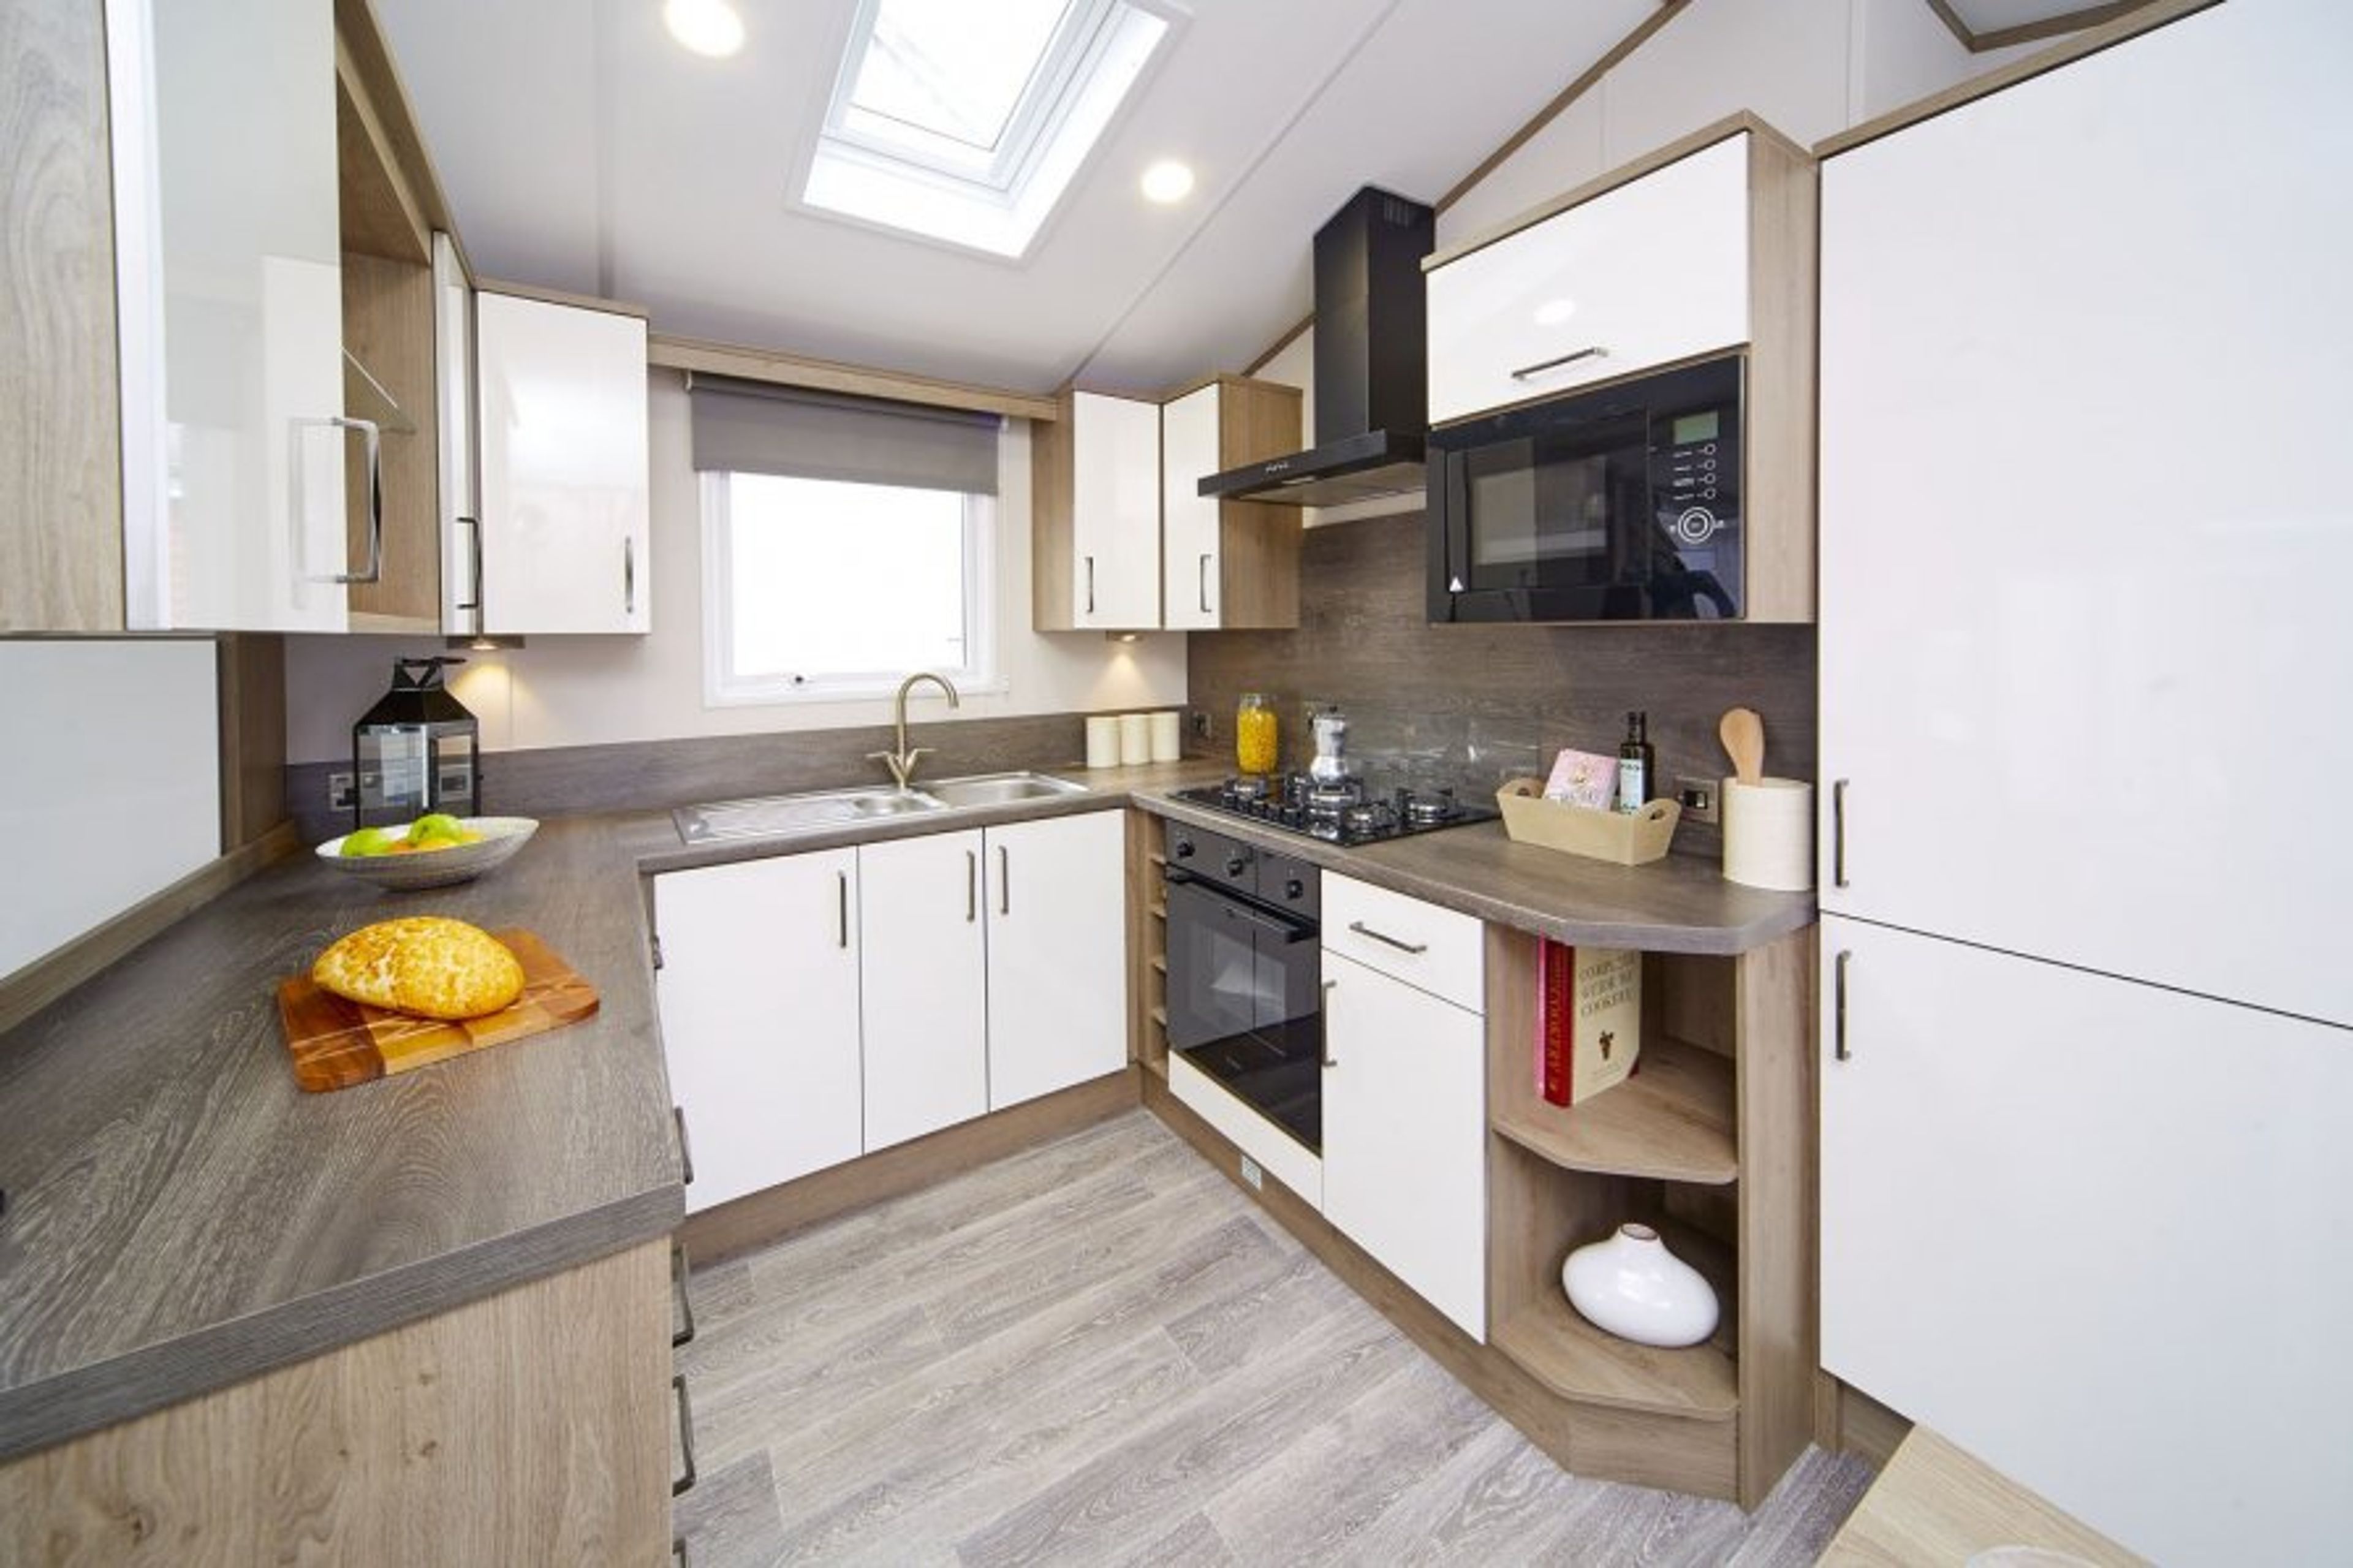 Fully equipped modern kitchen with dishwasher and fridge freezer